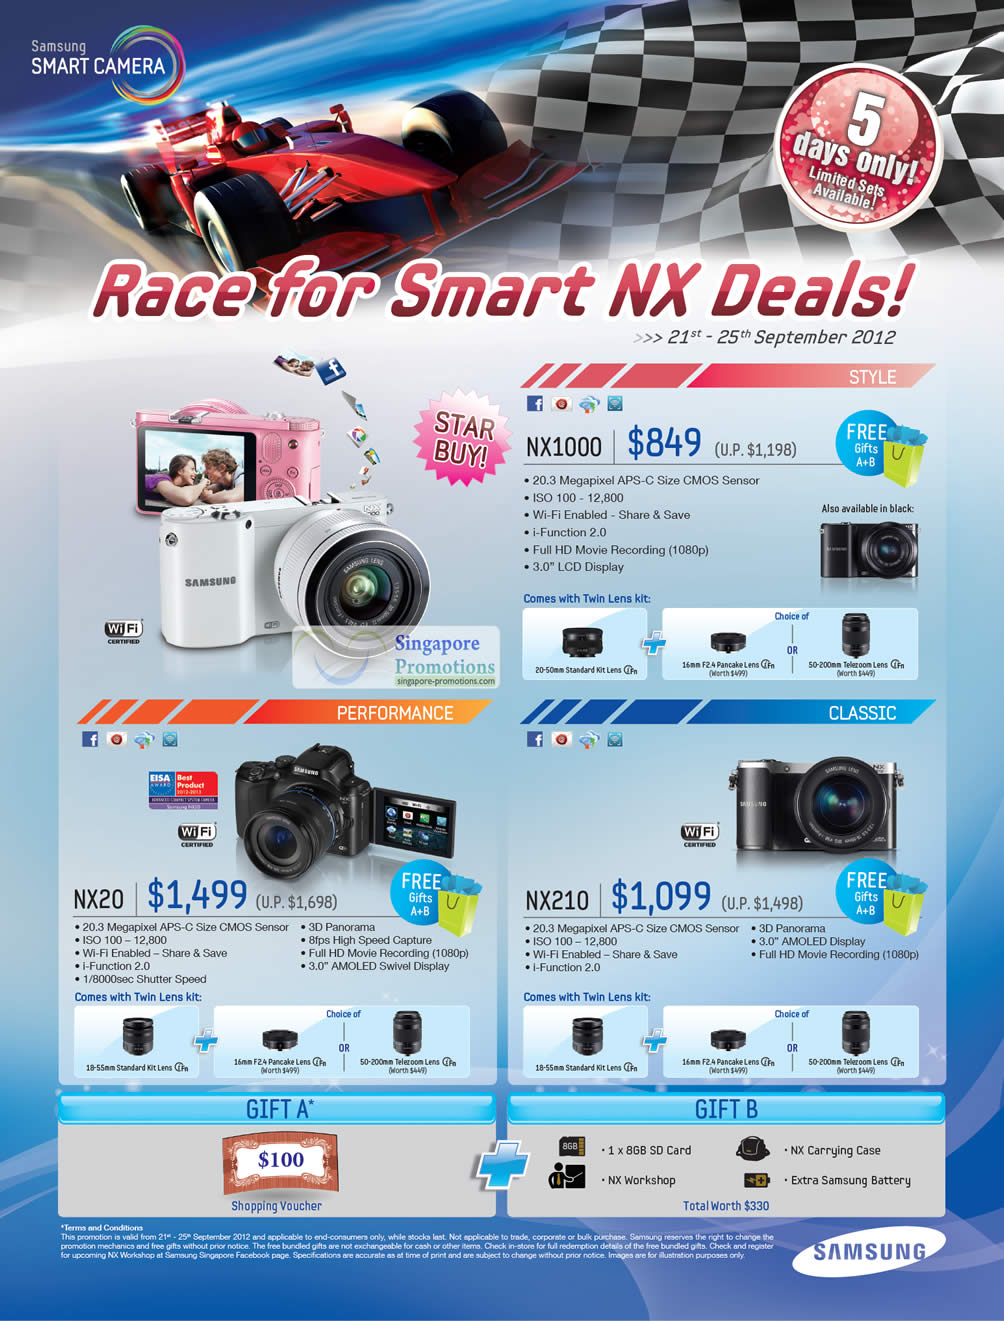 Featured image for Samsung Digital Cameras Promotion Offers With Free Gifts 20 Sep - 21 Oct 2012